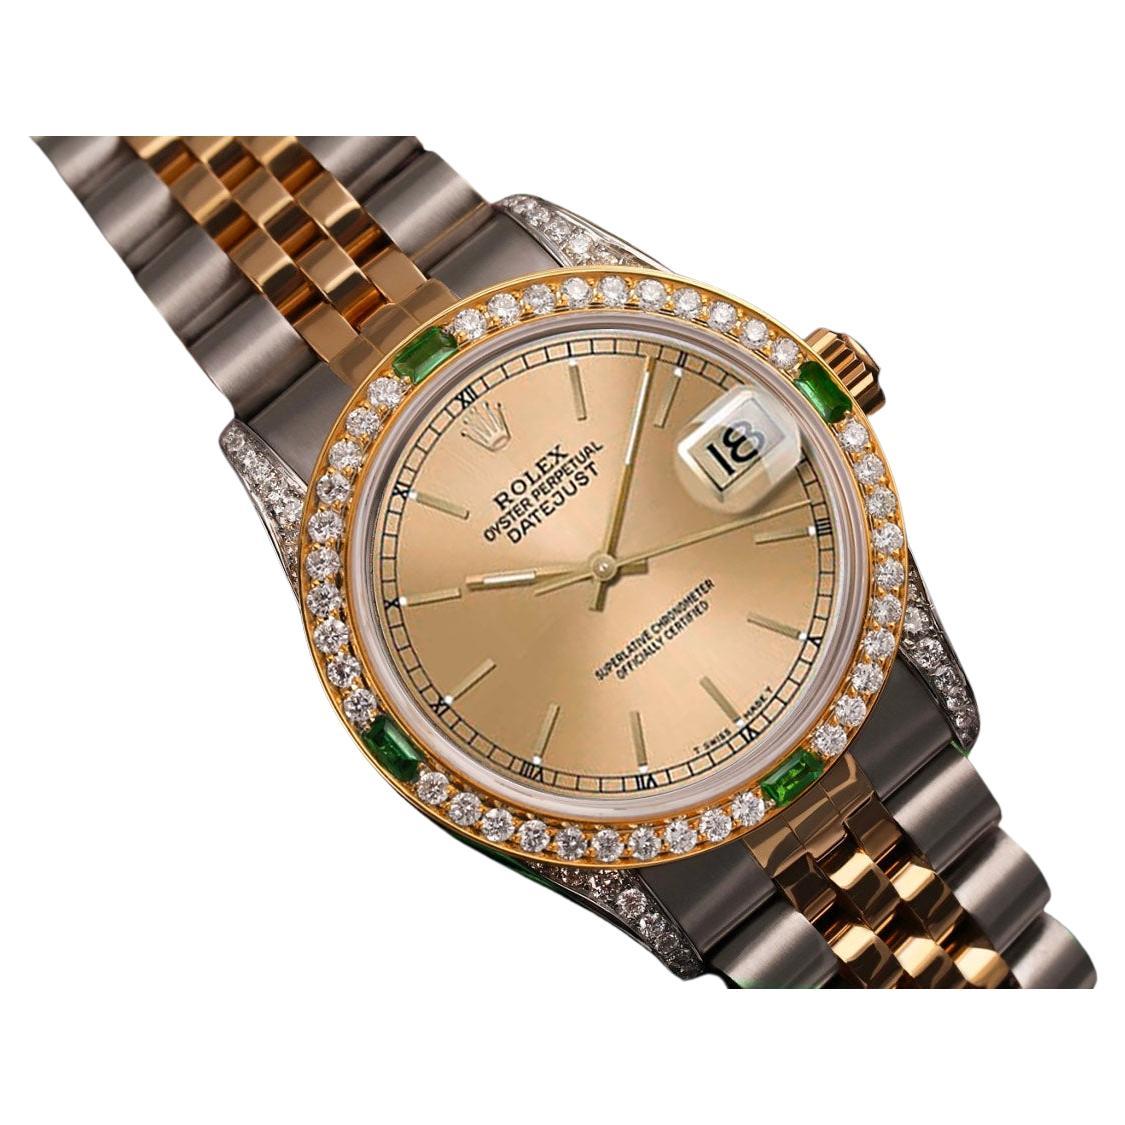 Women's Rolex Datejust Champagne Dial Diamond and Emerald Bezel Watch For Sale